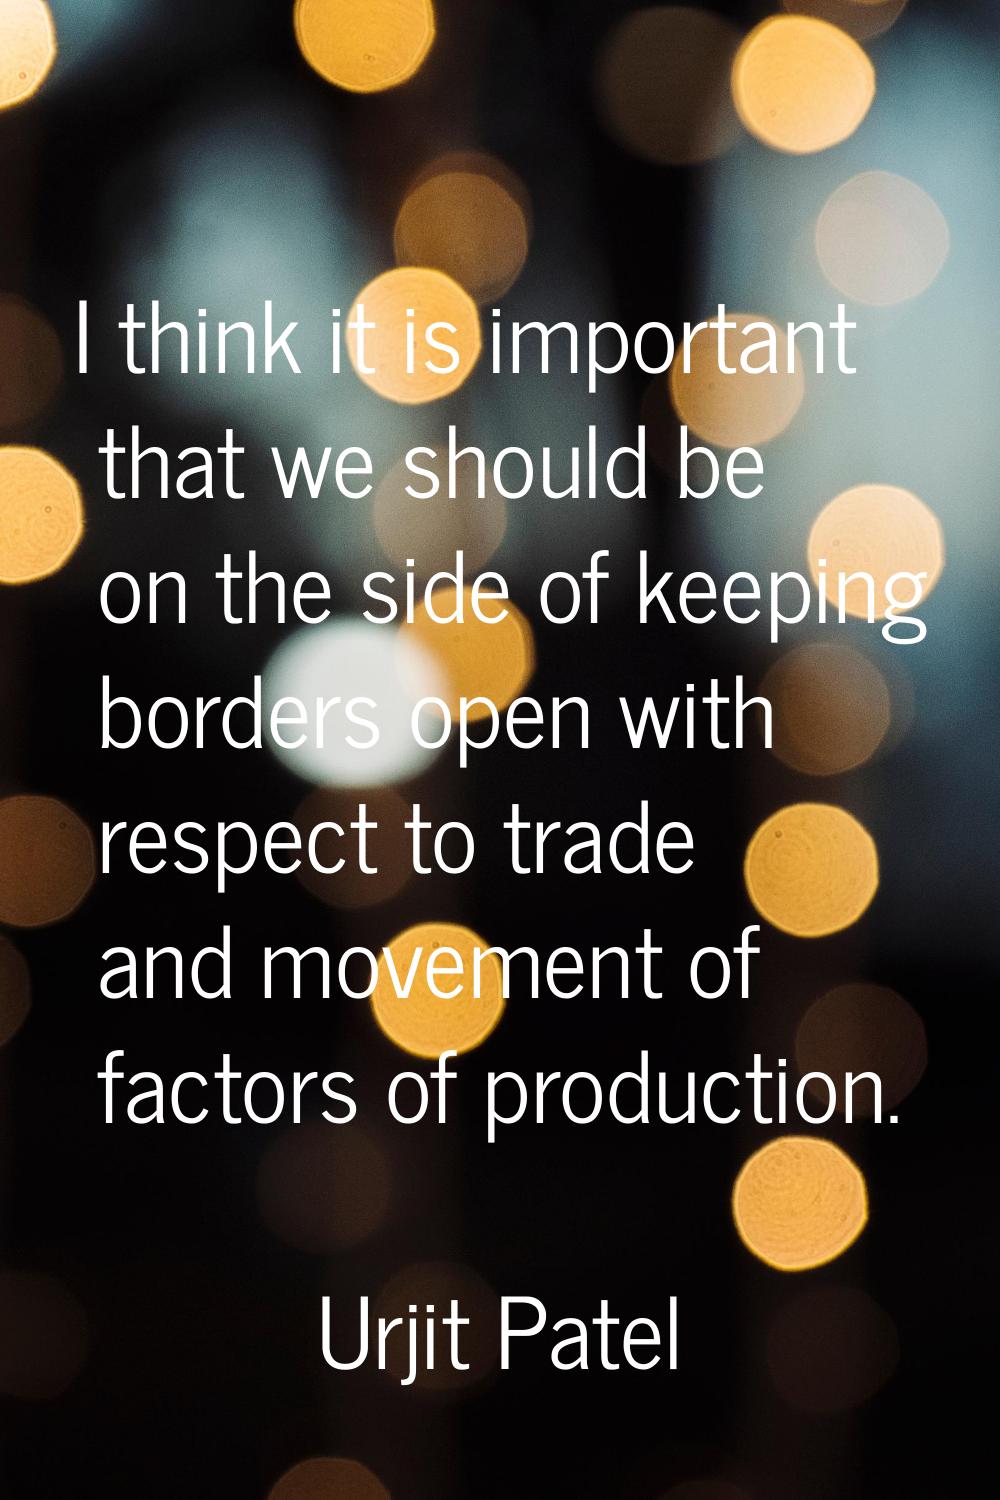 I think it is important that we should be on the side of keeping borders open with respect to trade